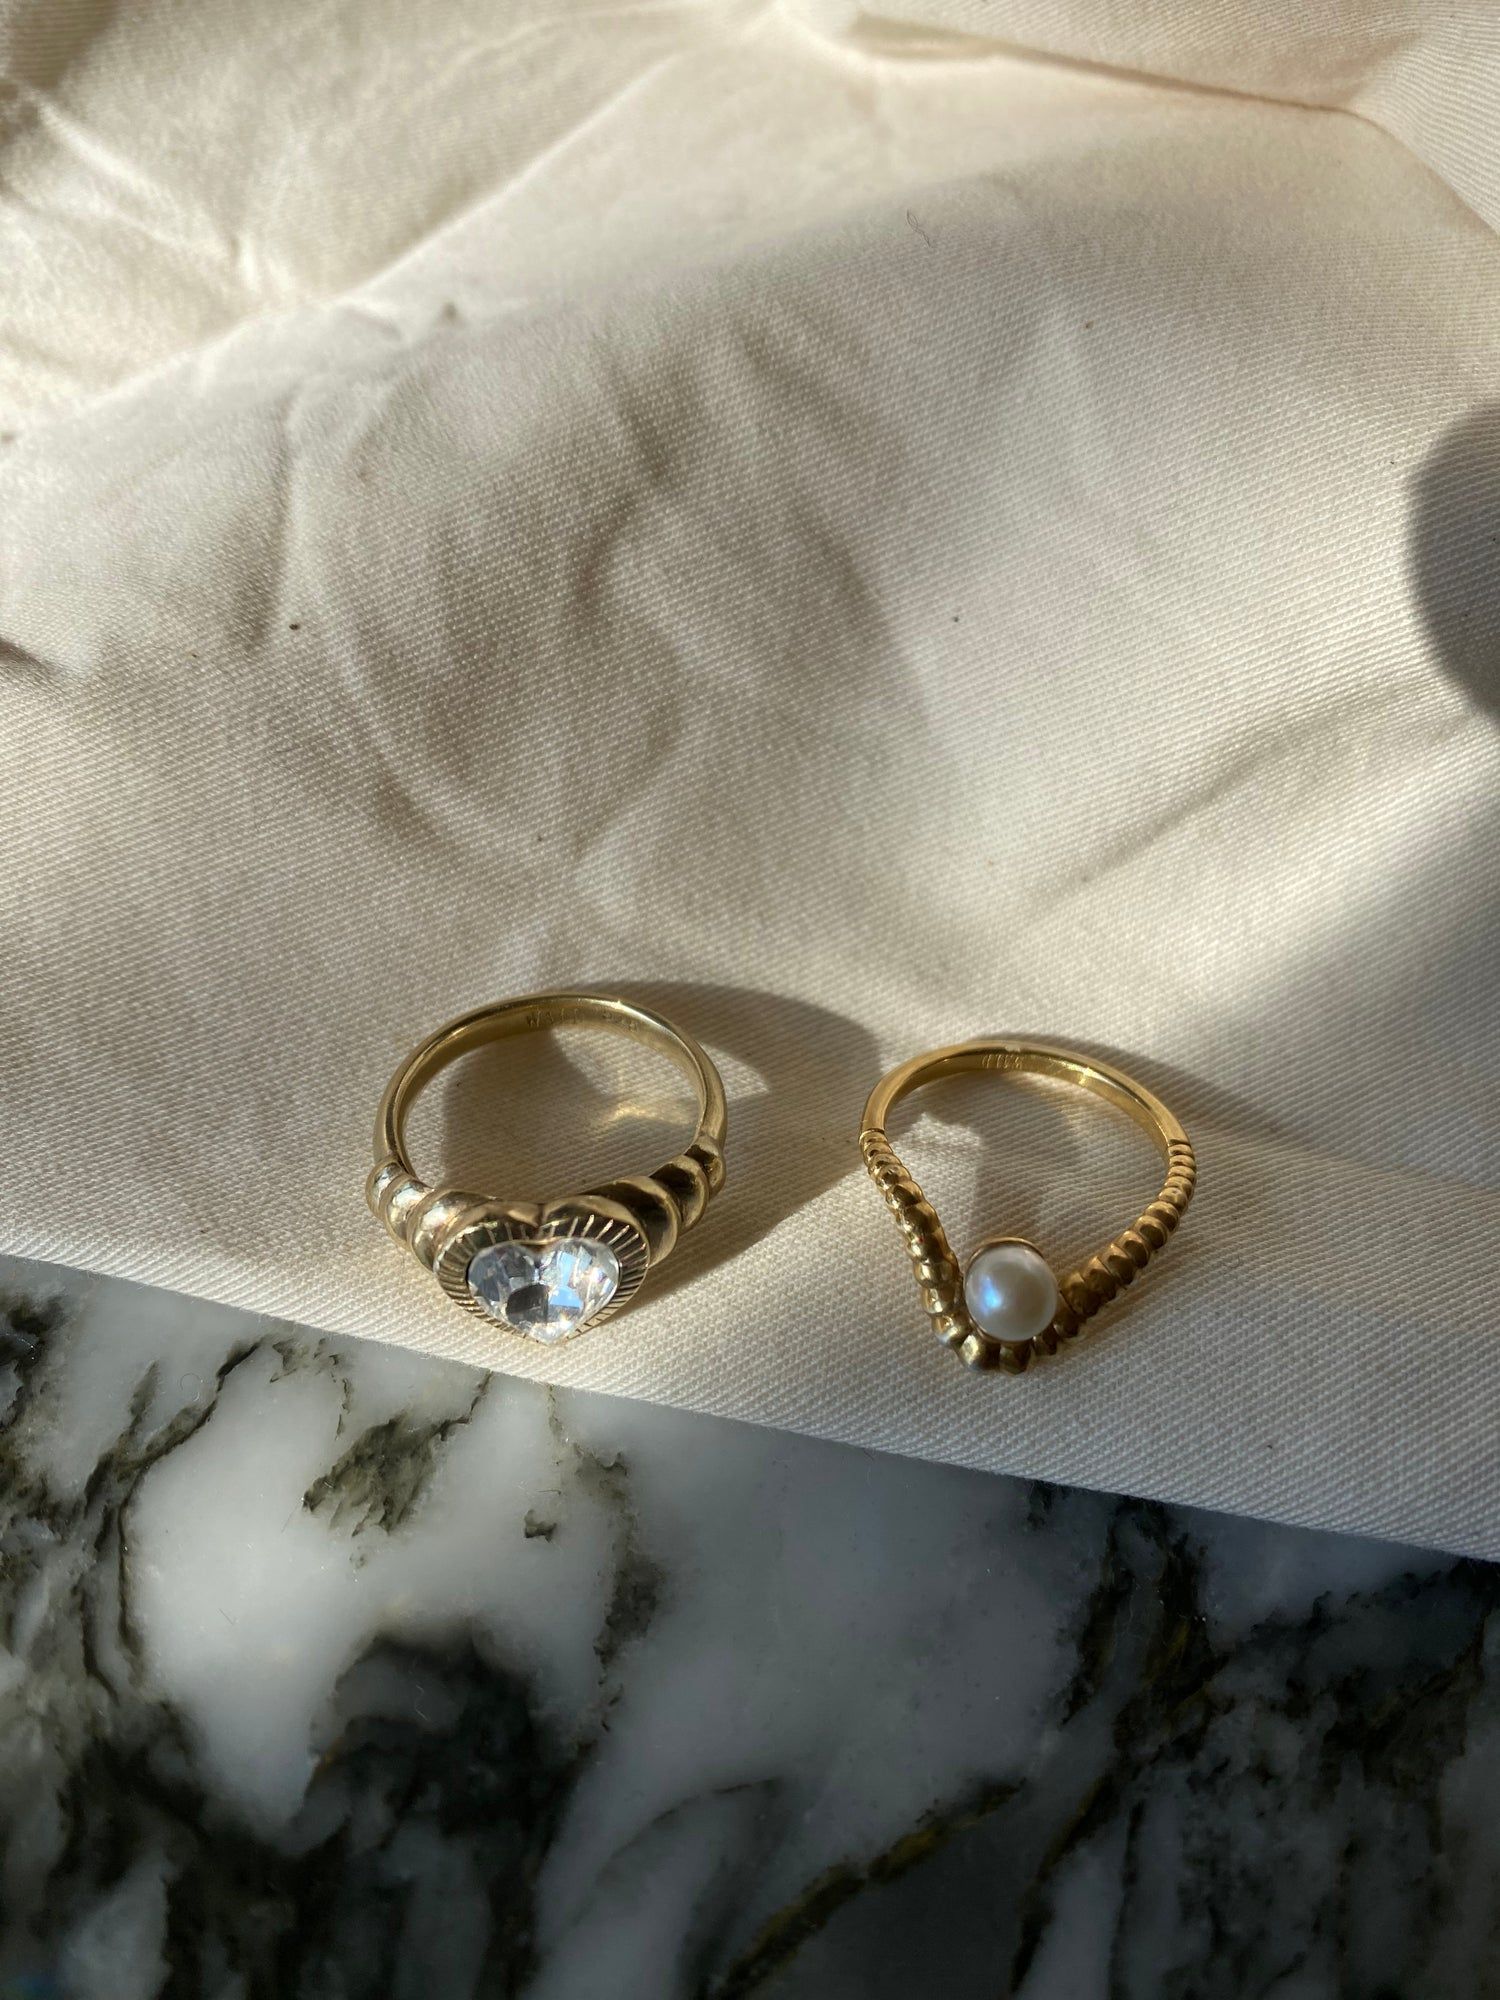 Two WALD Berlin NYC If I Rule The World rings with pearls on top of a recycled marble table.